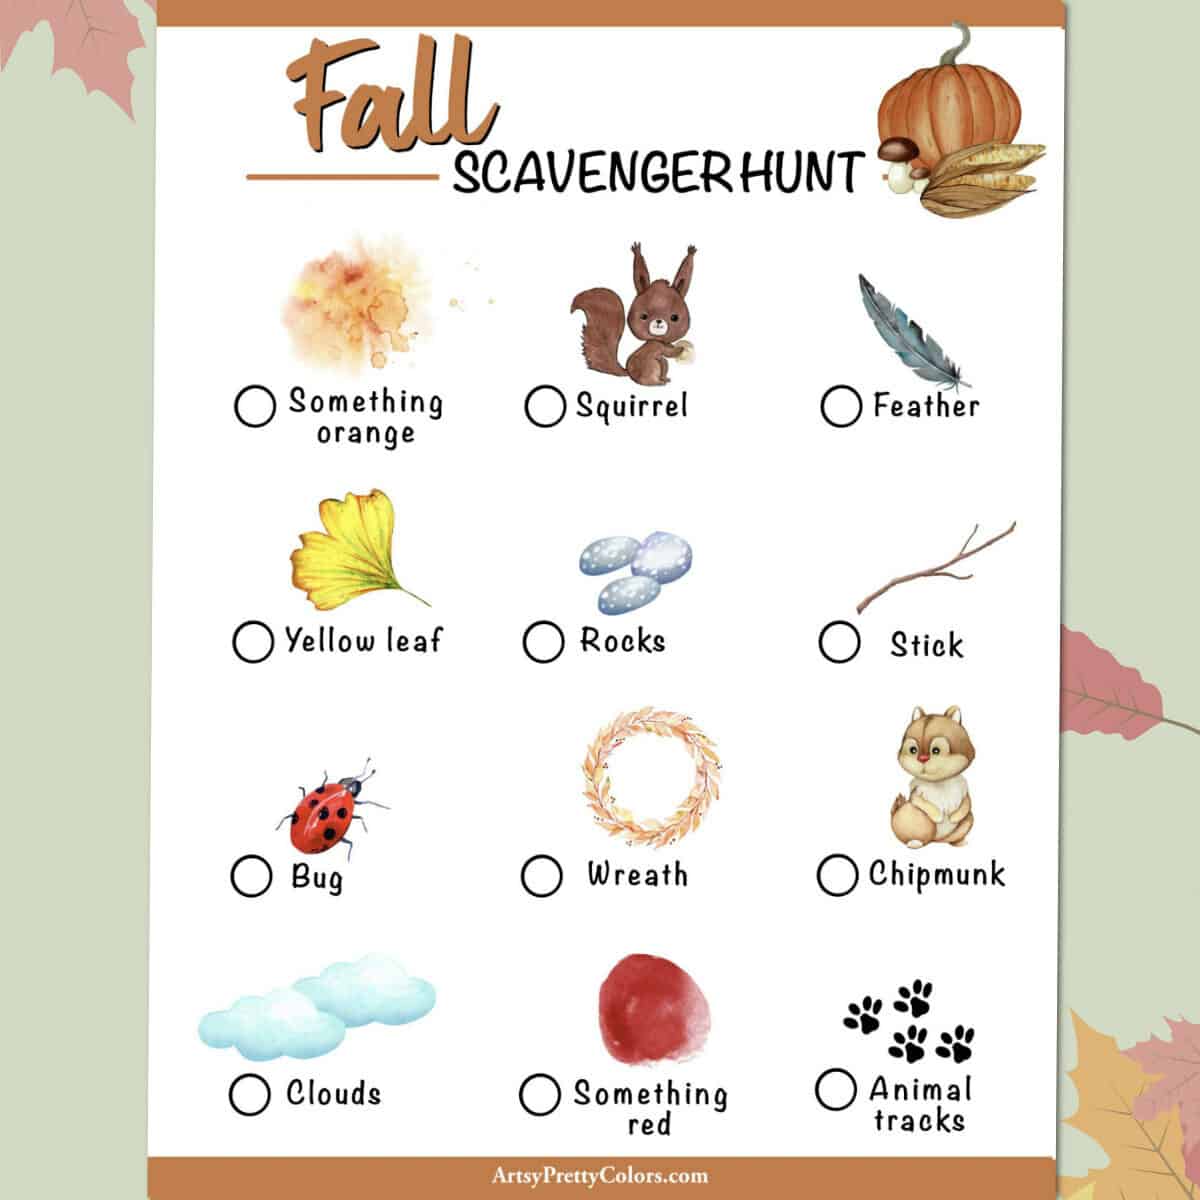 A scavenger hunt with images of fall themed items with check boxes next to them.